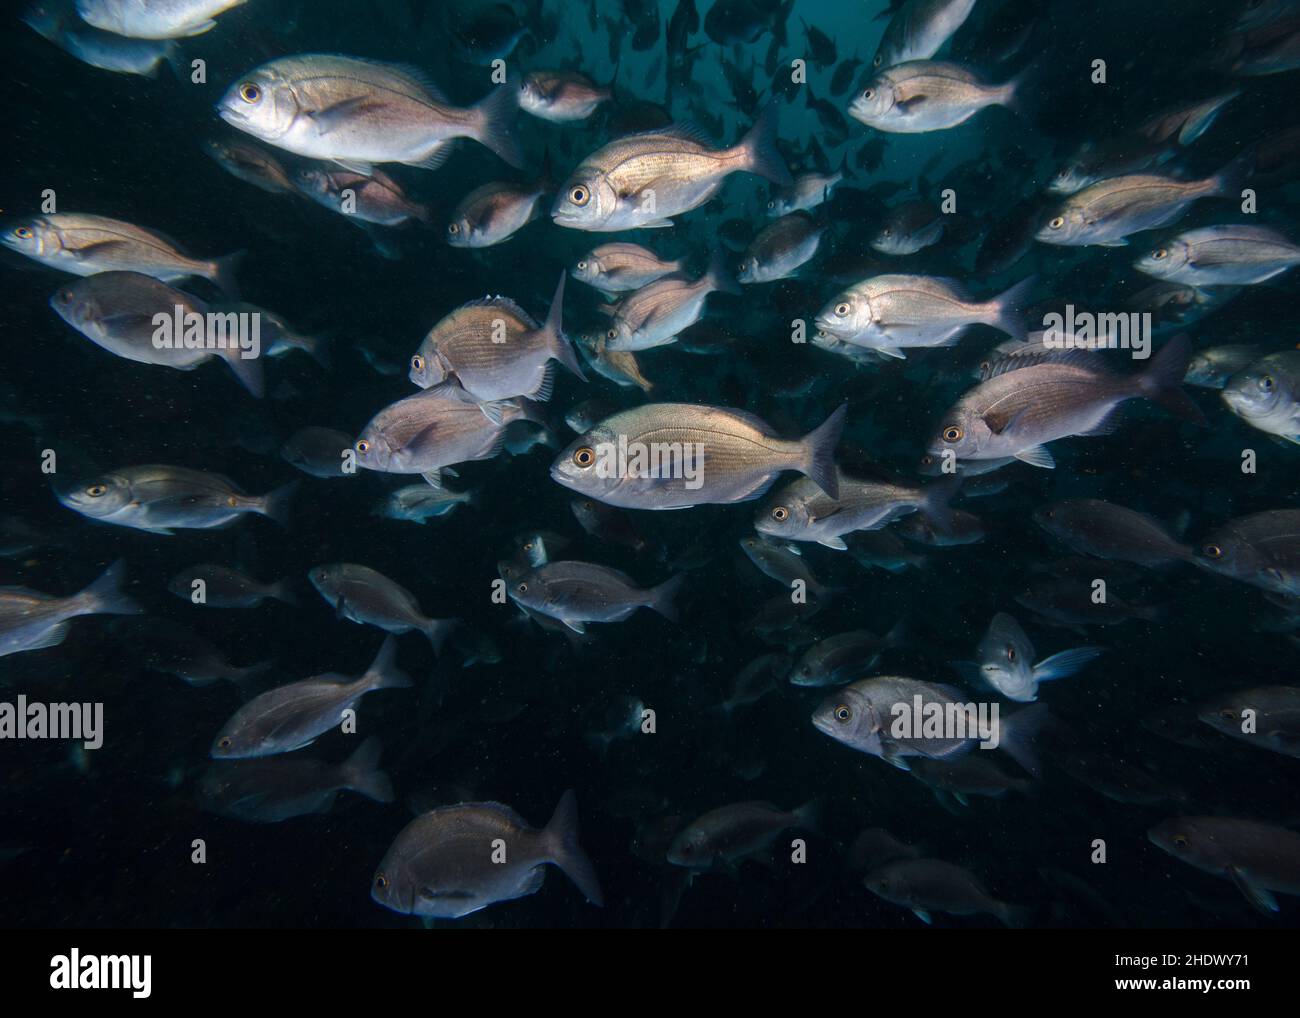 Close-up of a School of silver Hottentot fish underwater (Pachymetopon blochii) swimming in deep water. Stock Photo